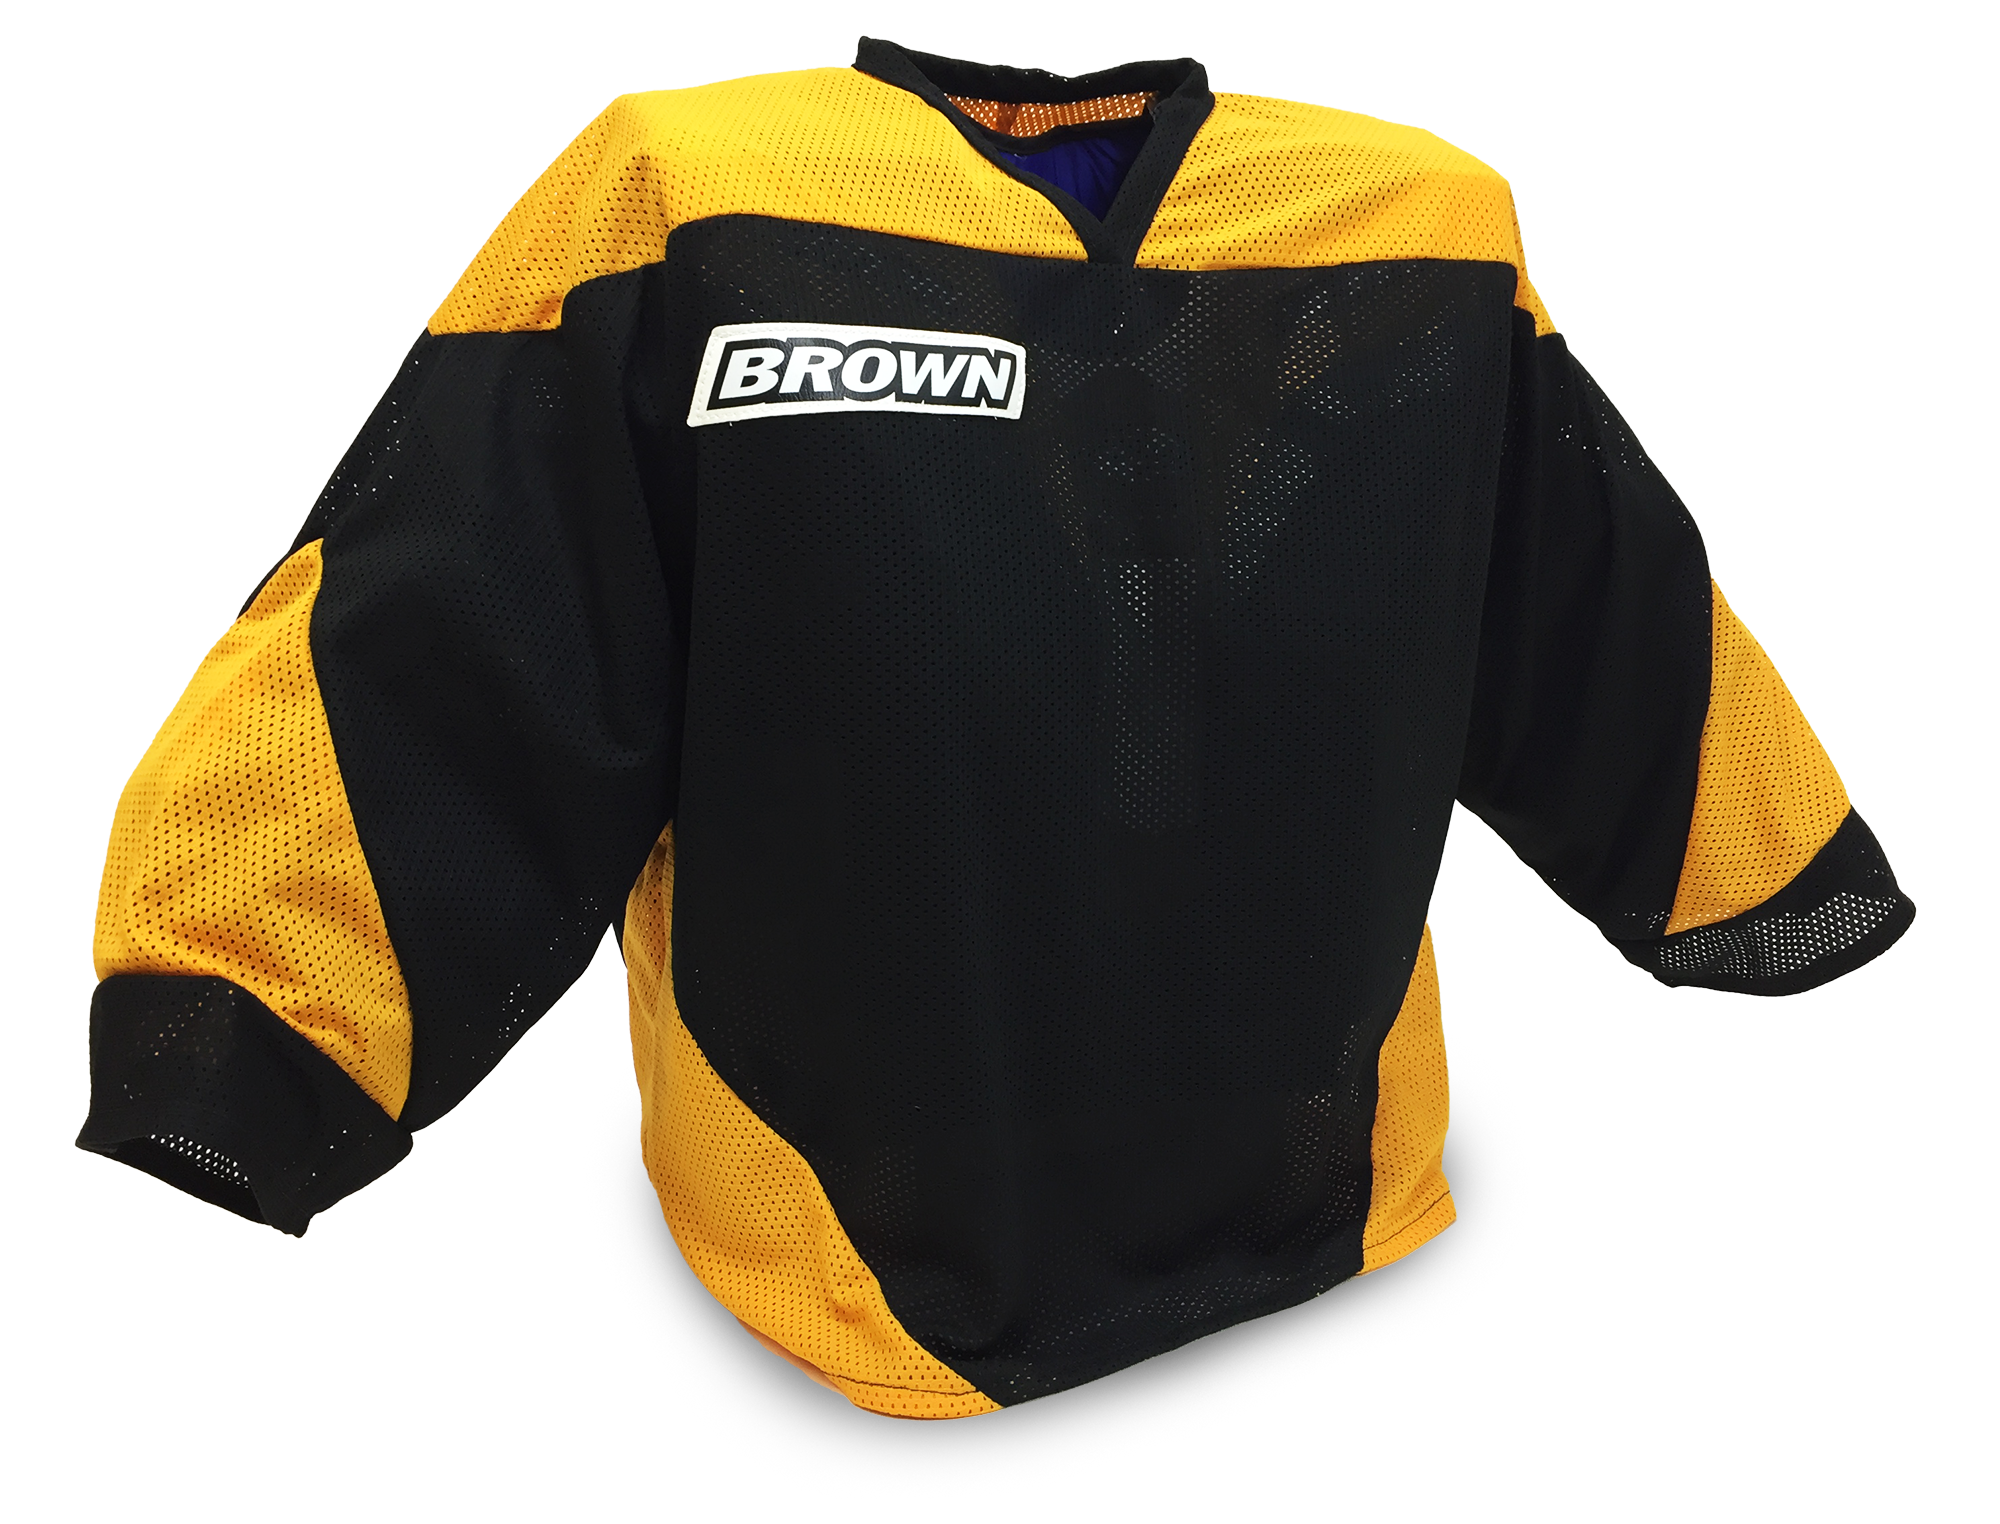 2400 jersey in black and sport gold